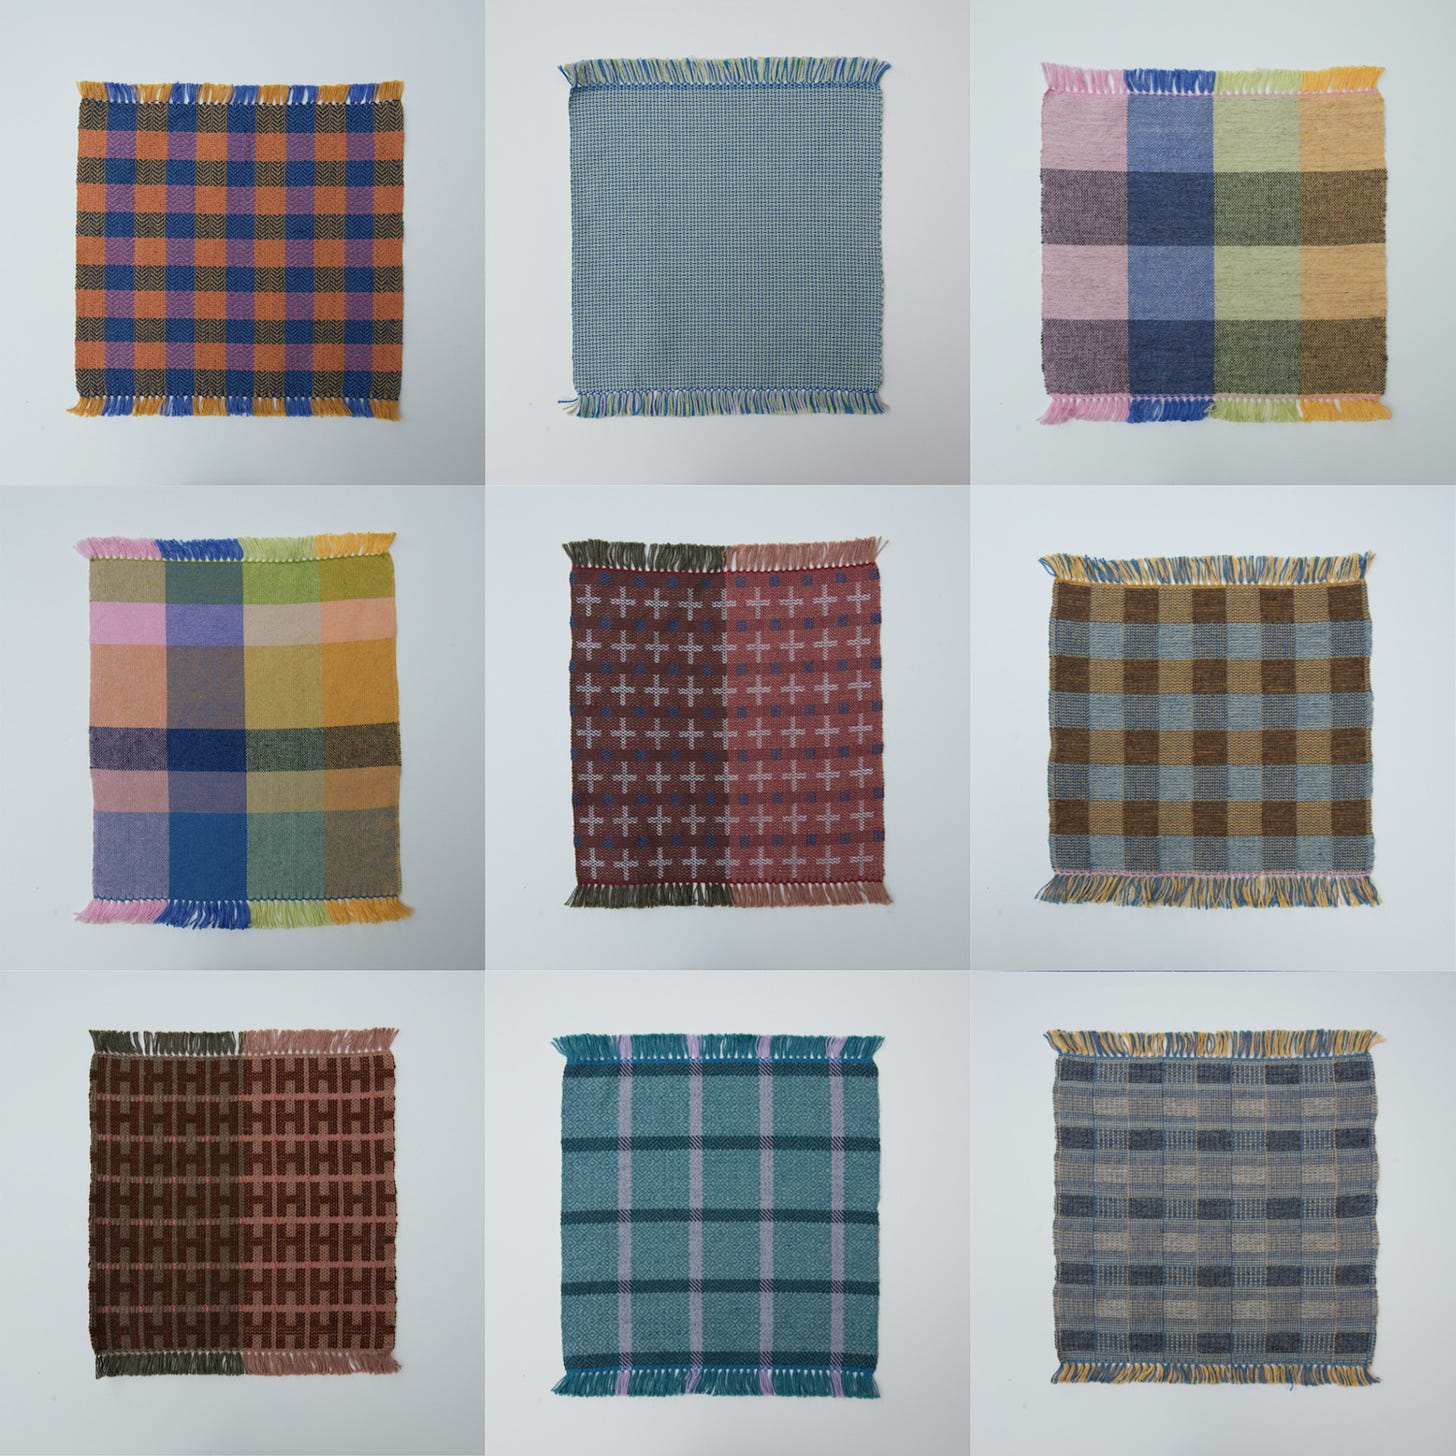 A grid of 9 samples, in three rows and columns, of textile samples